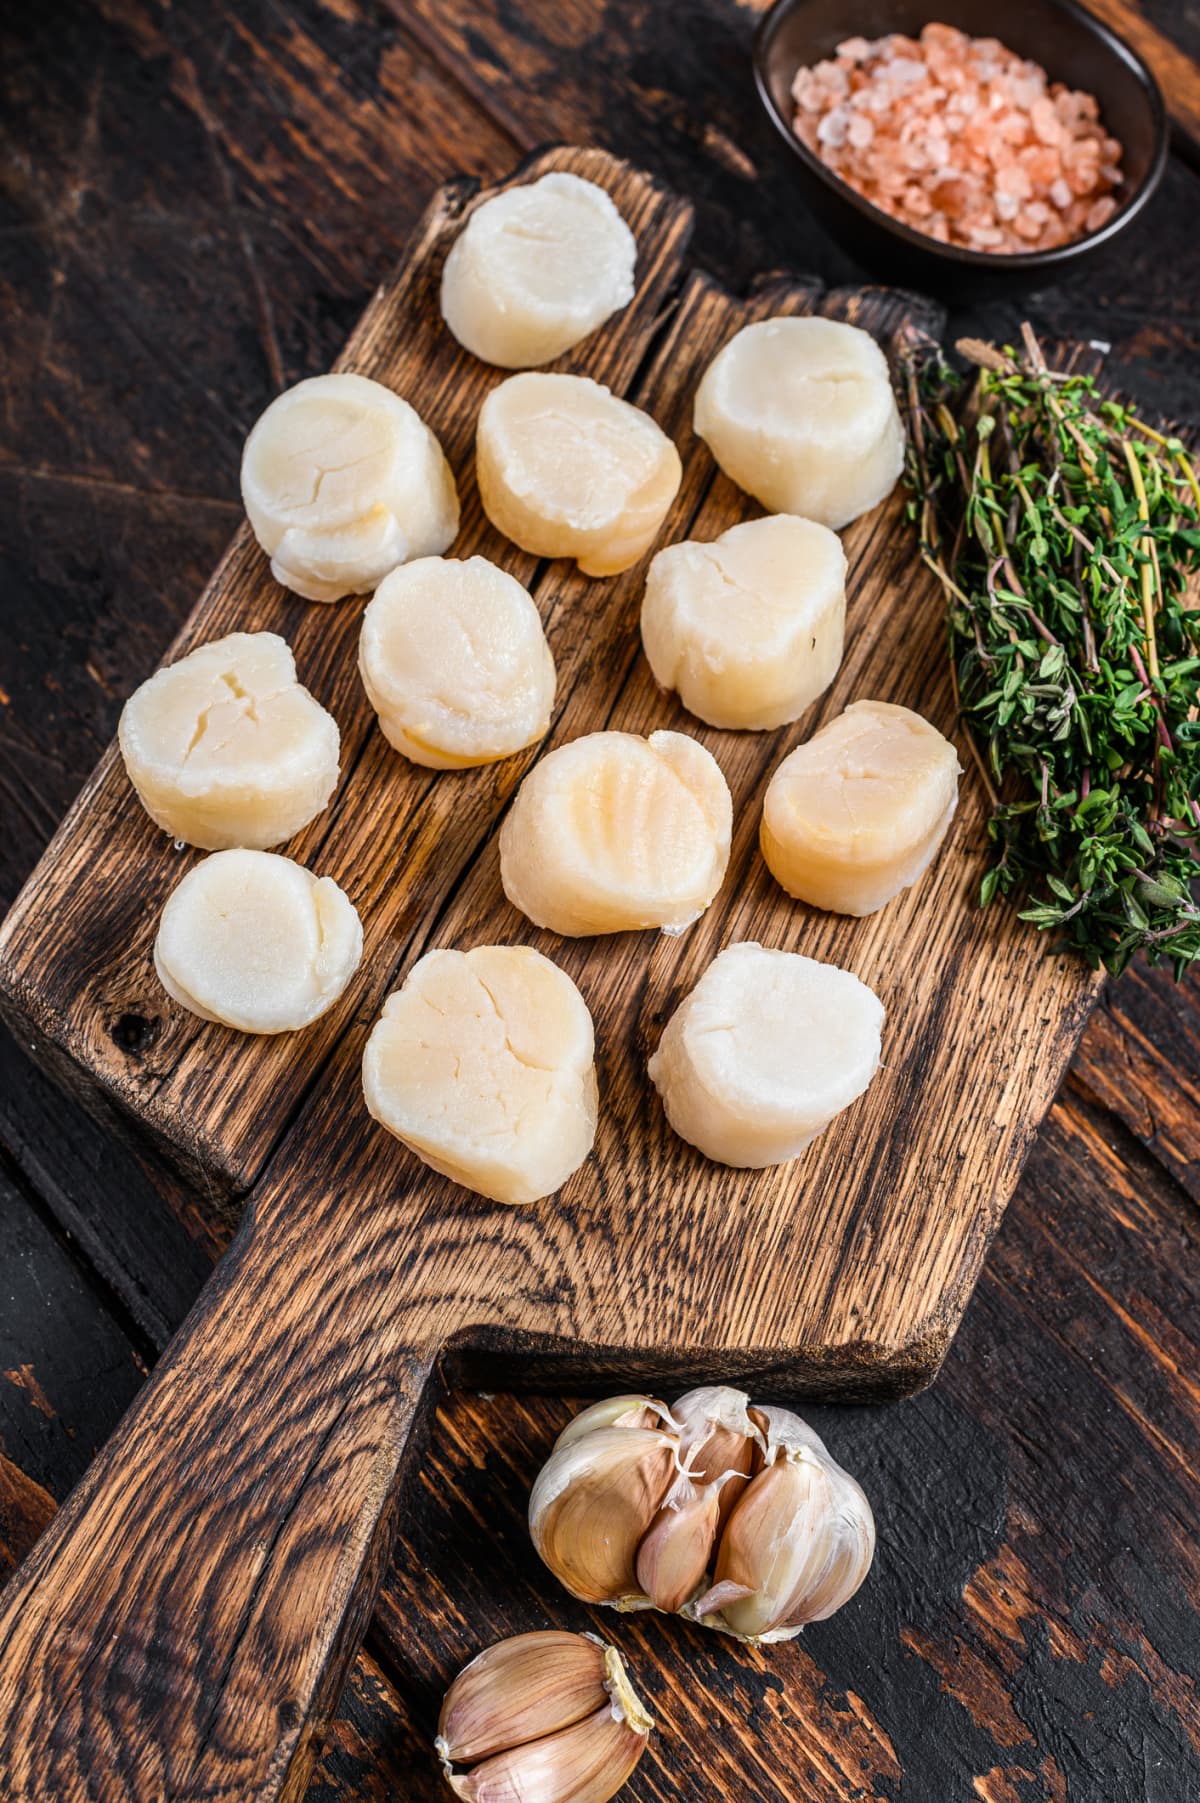 Raw scallops on wooden cutting board with garlic, herbs, and salt on the side